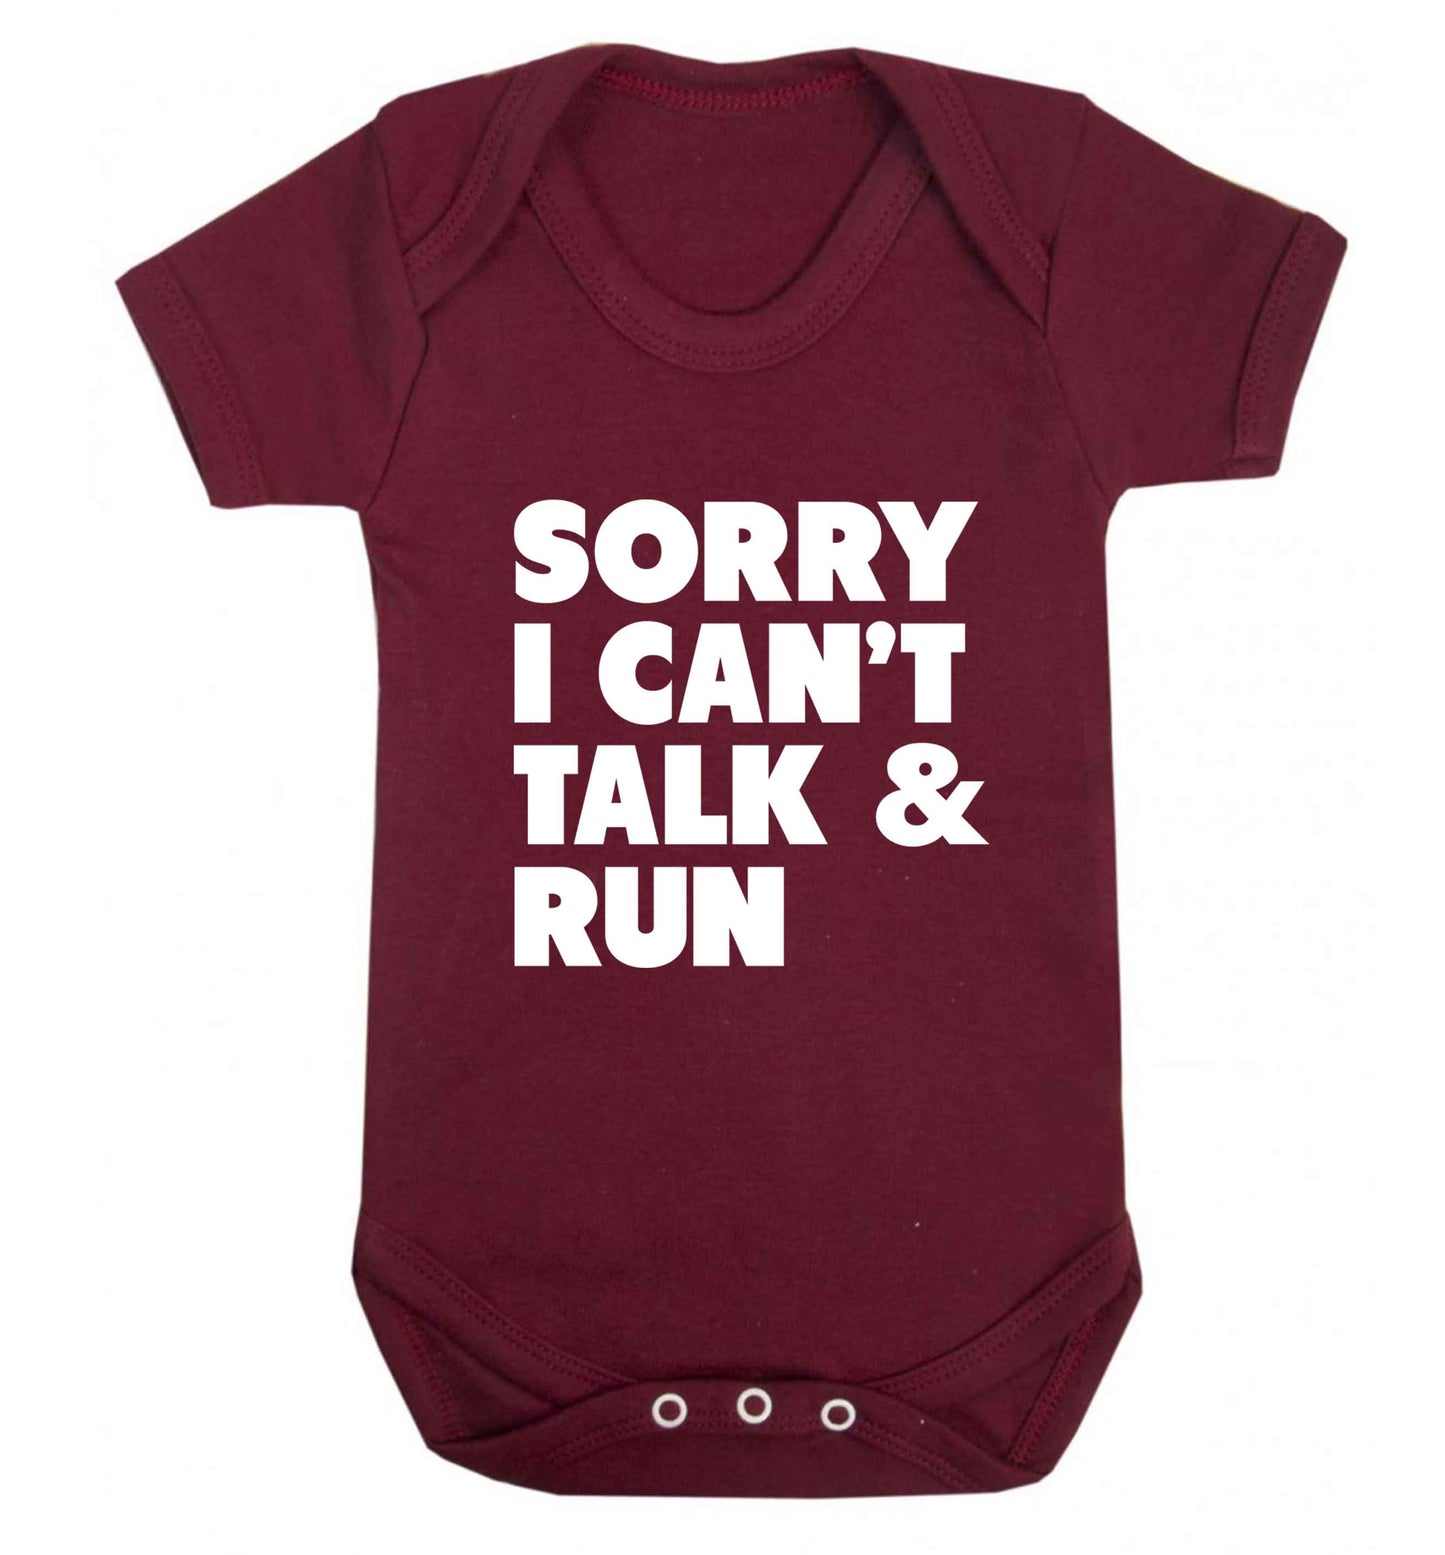 Sorry I can't talk and run baby vest maroon 18-24 months